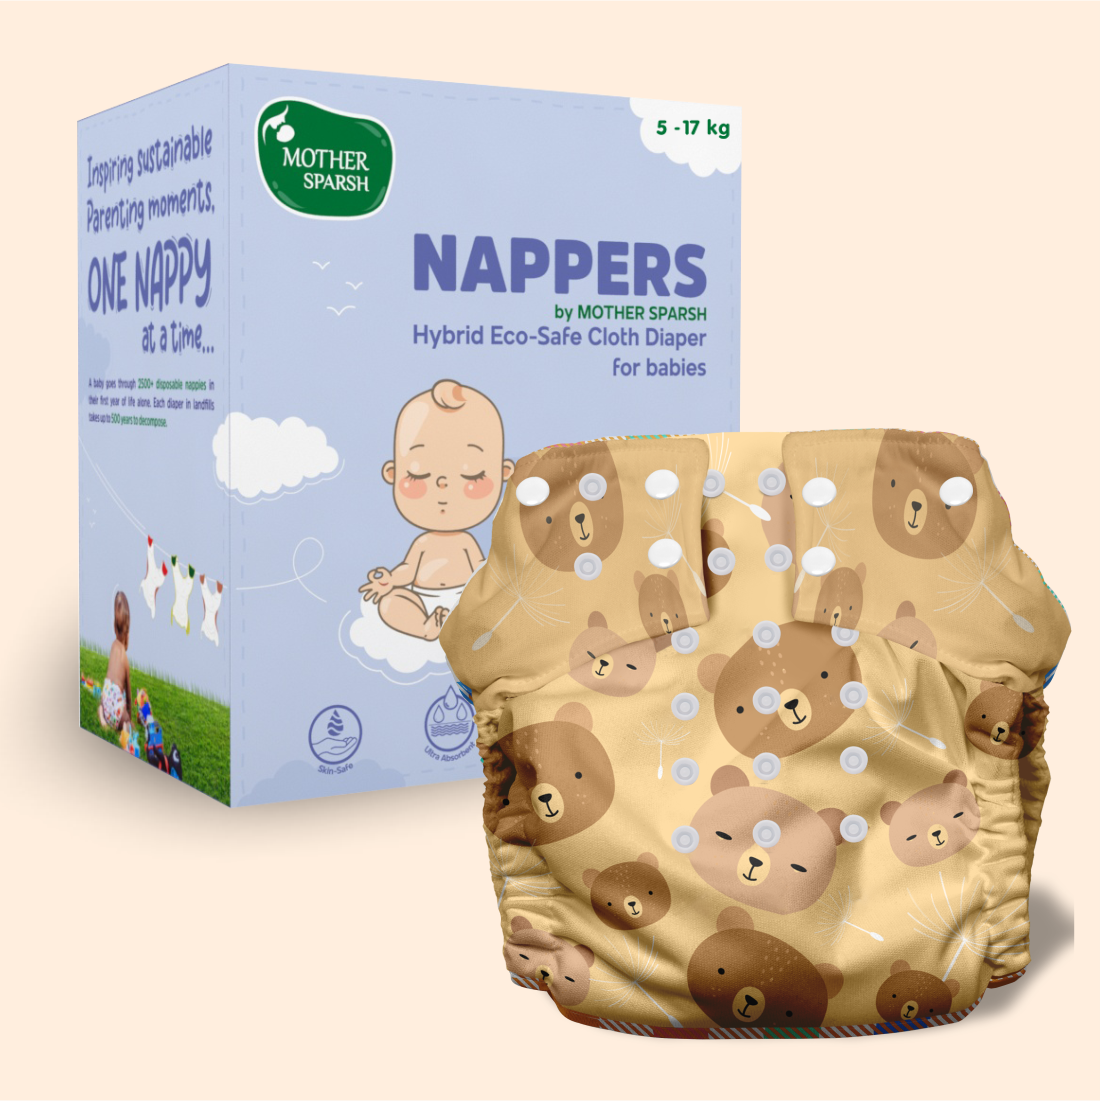 eco baby pampers